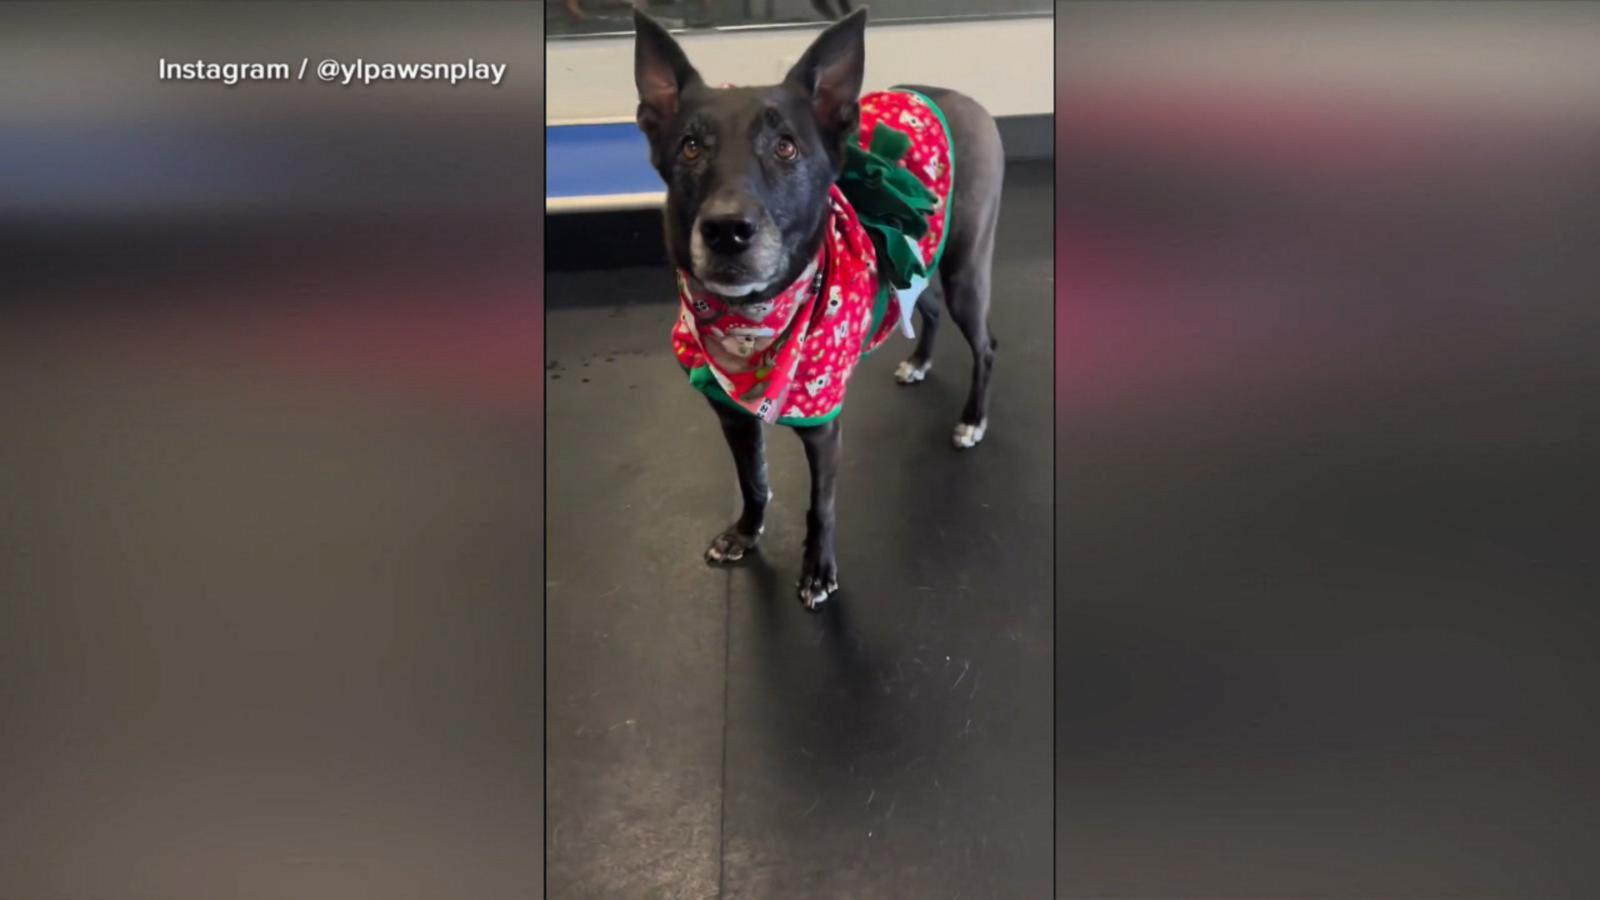 VIDEO: Dogs get into Christmas spirit